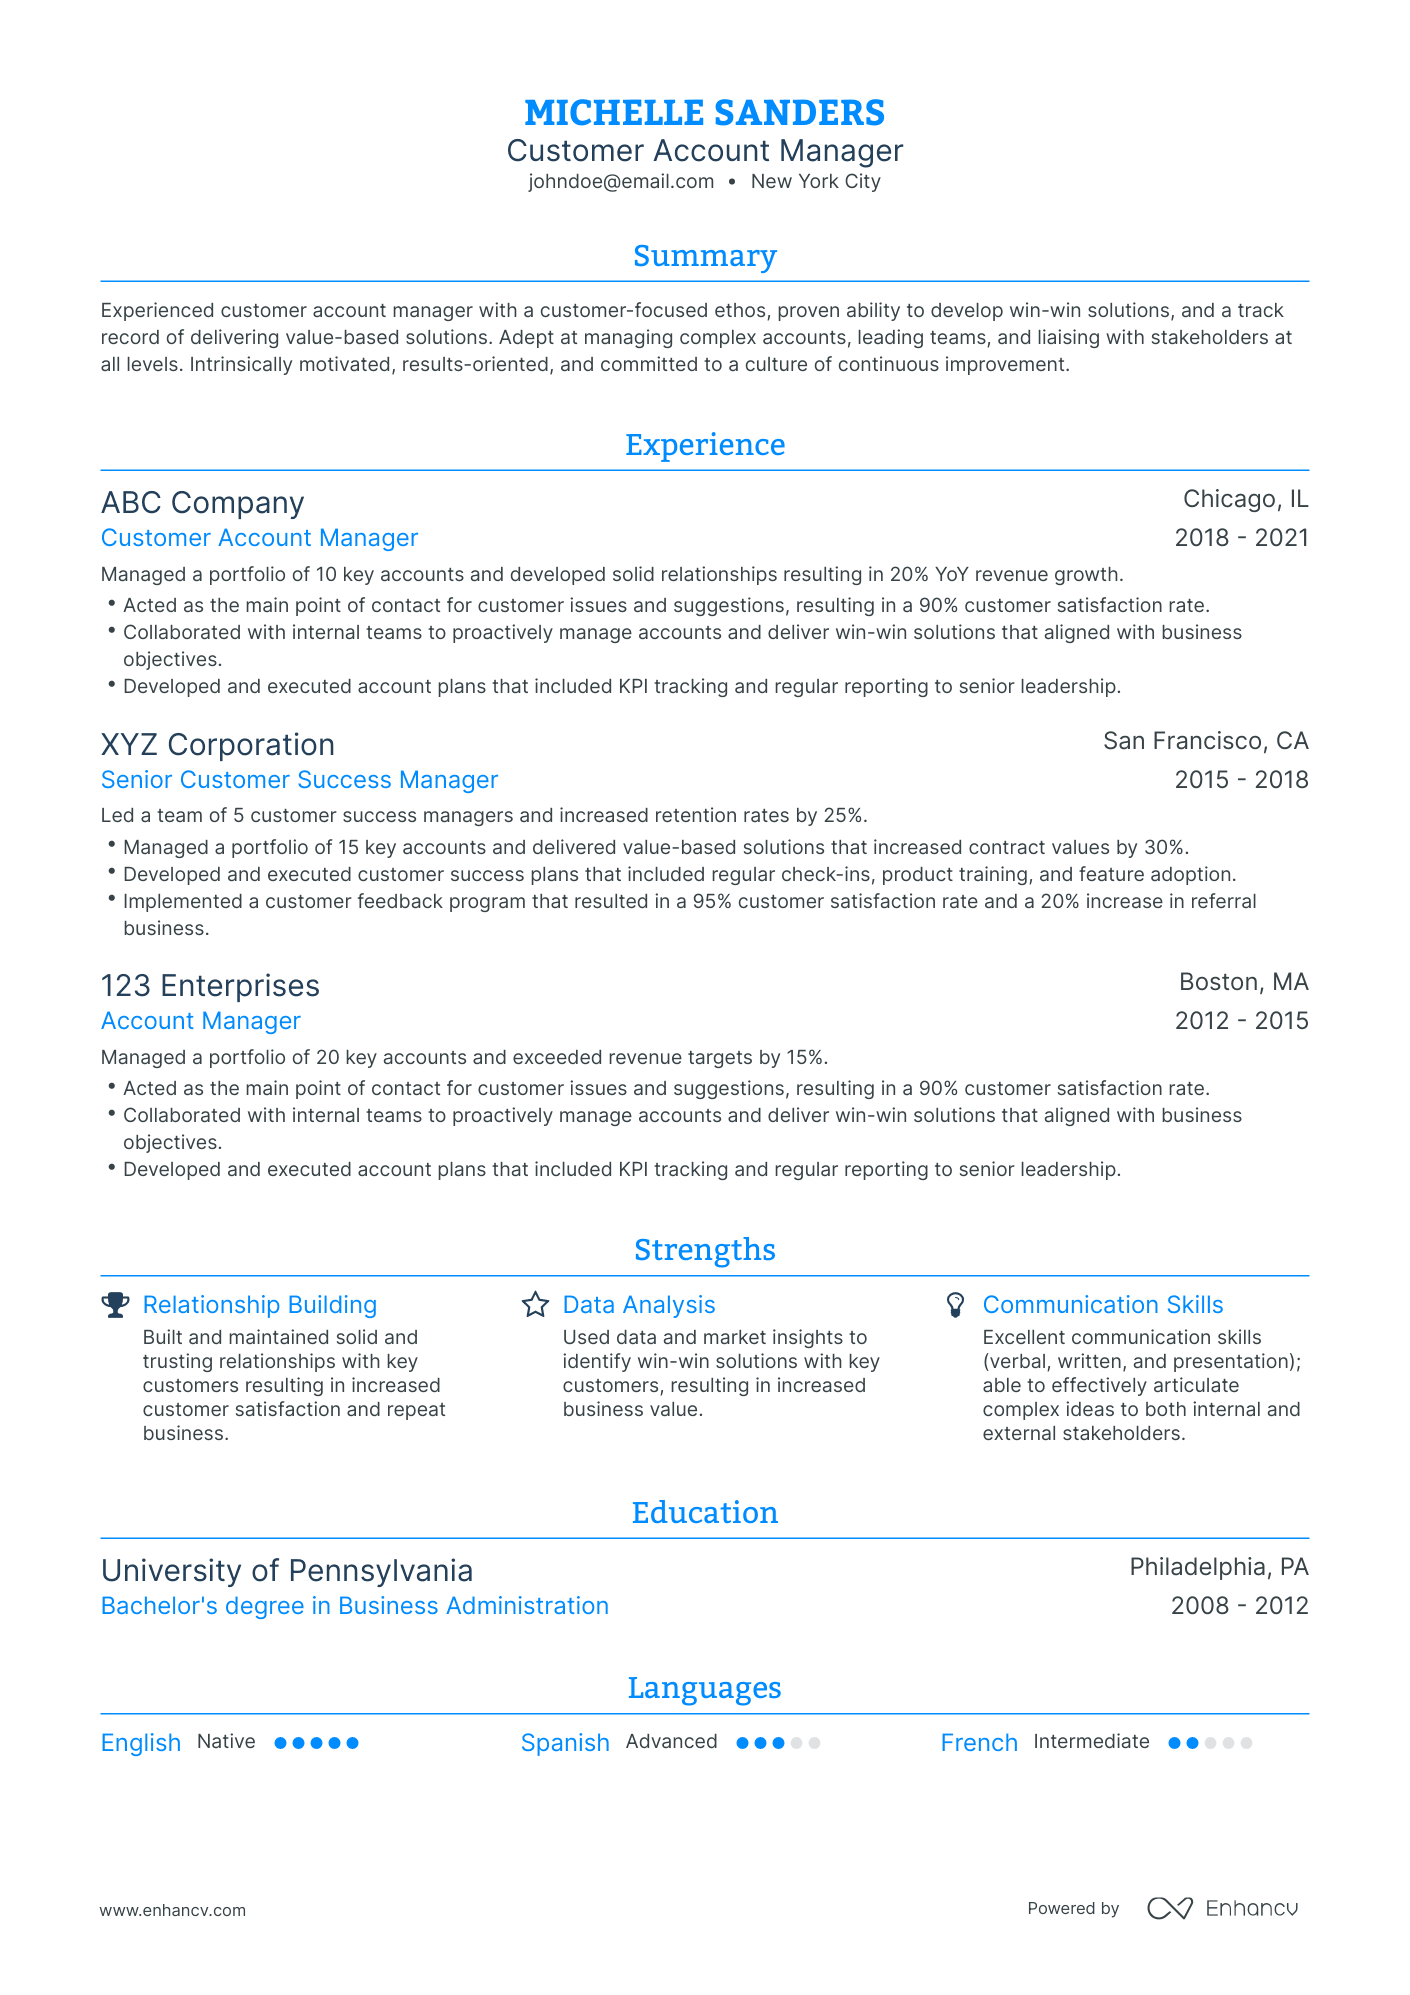 Traditional Customer Account Manager Resume Template